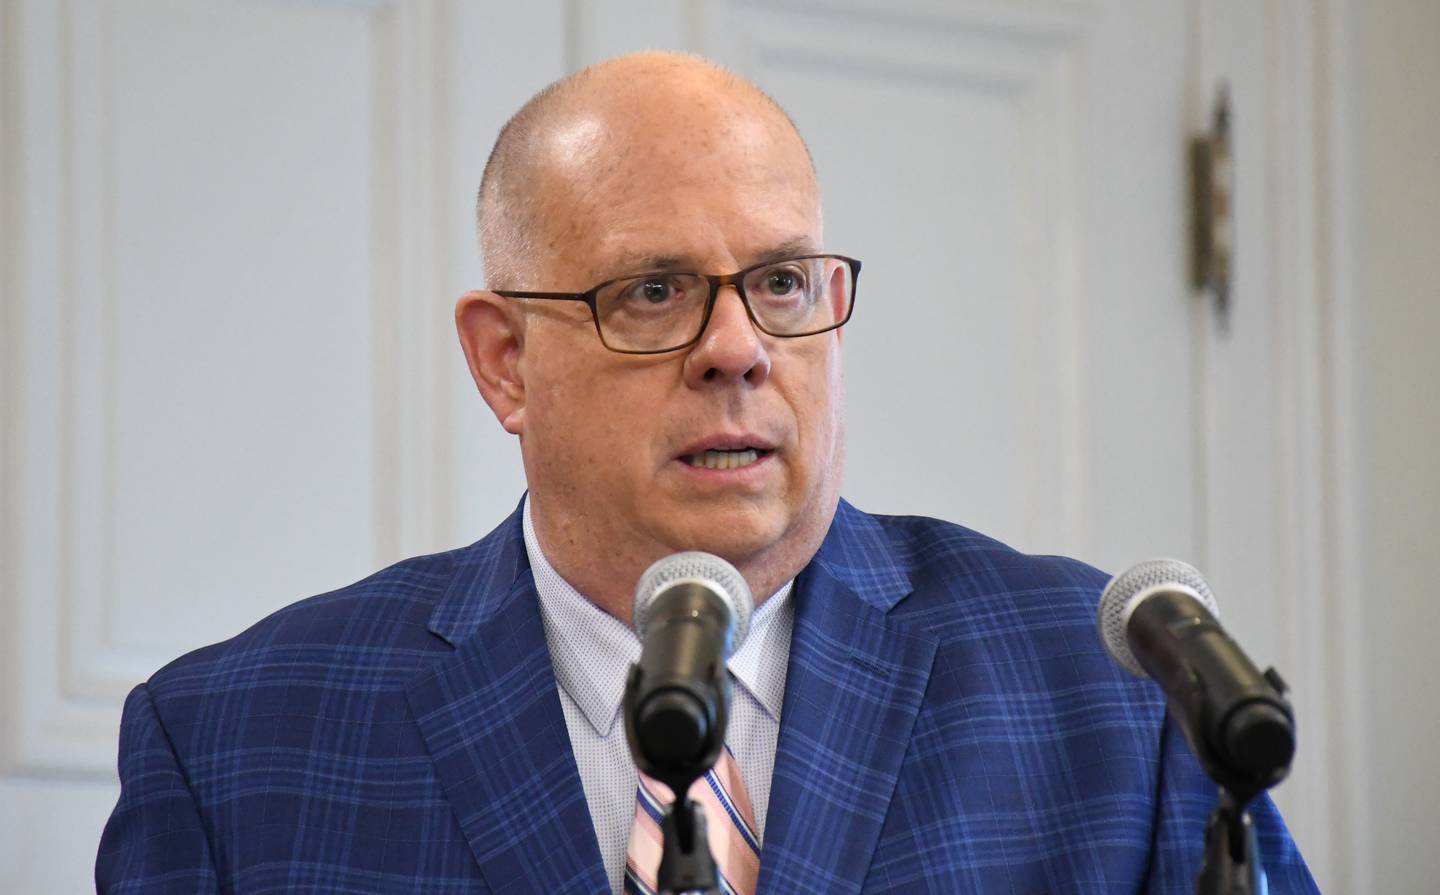 Maryland Gov. Larry Hogan, a Republican, speaks at a bill-signing event in the Governor's Reception Room at the State House in Annapolis on March 18, 2022.